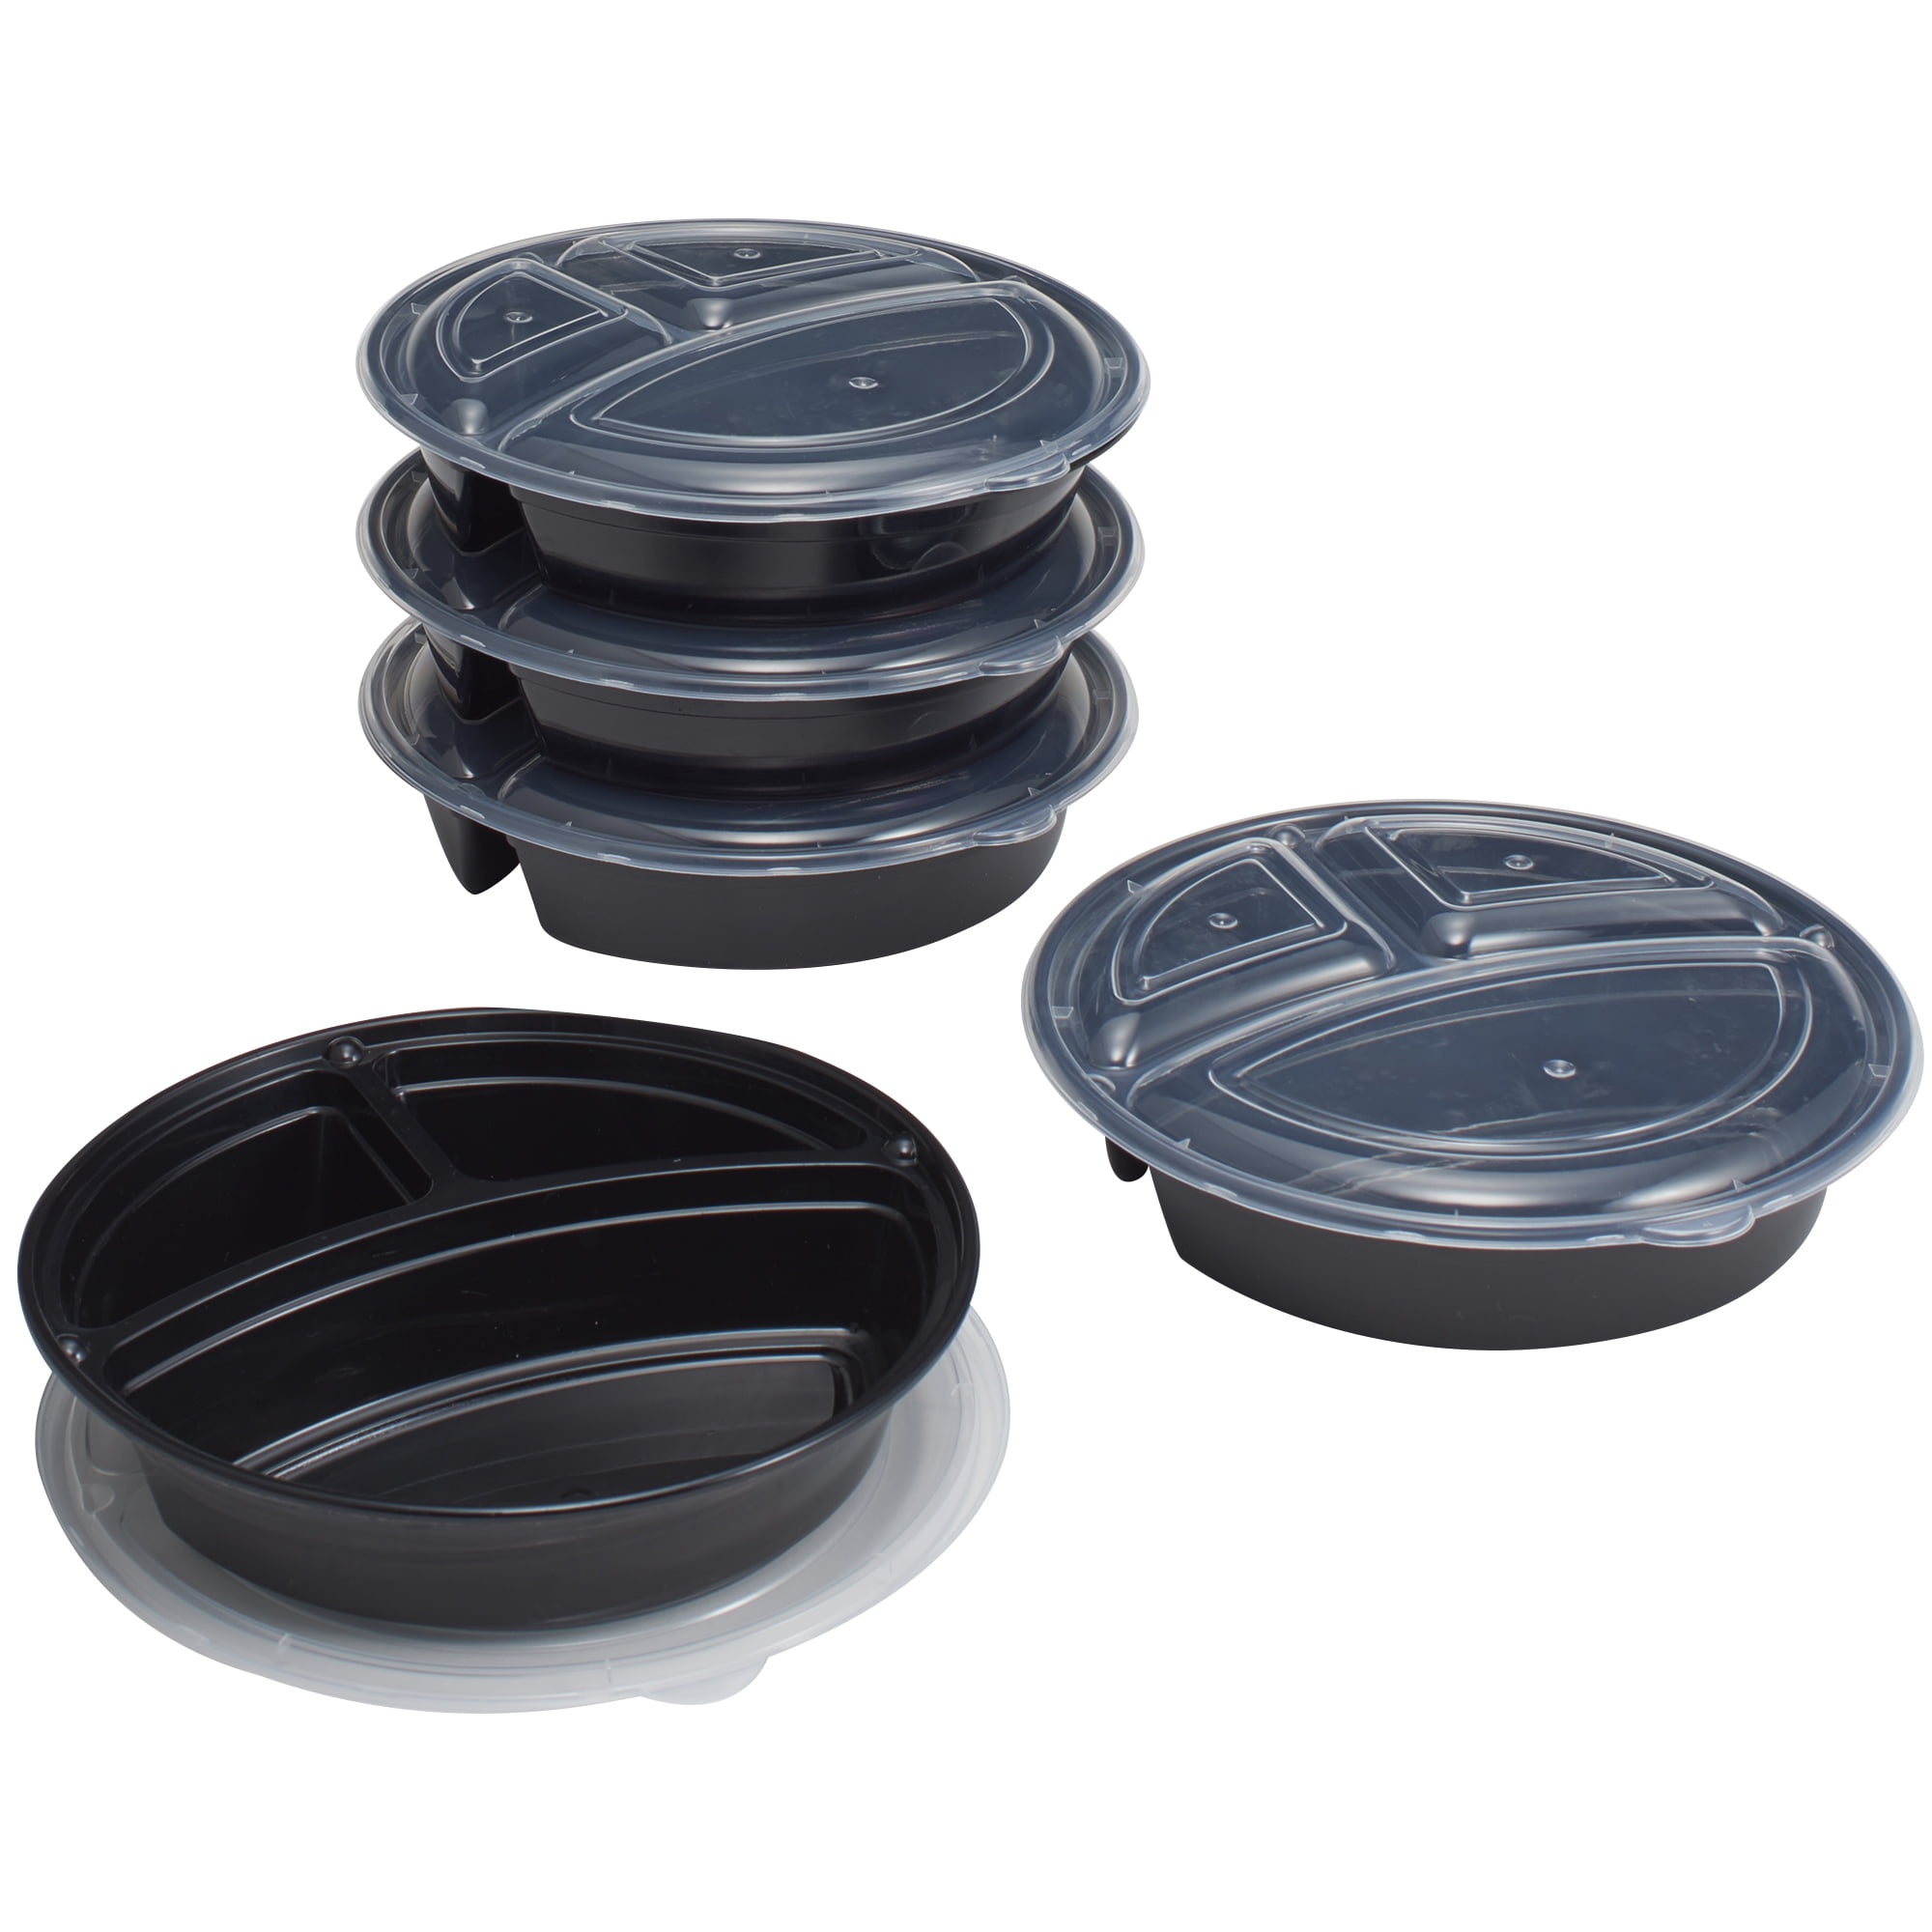 Mainstays 3-Compartment 1L Round Meal Prep Food Storage Container, 5 Pack, Size: One size, Black